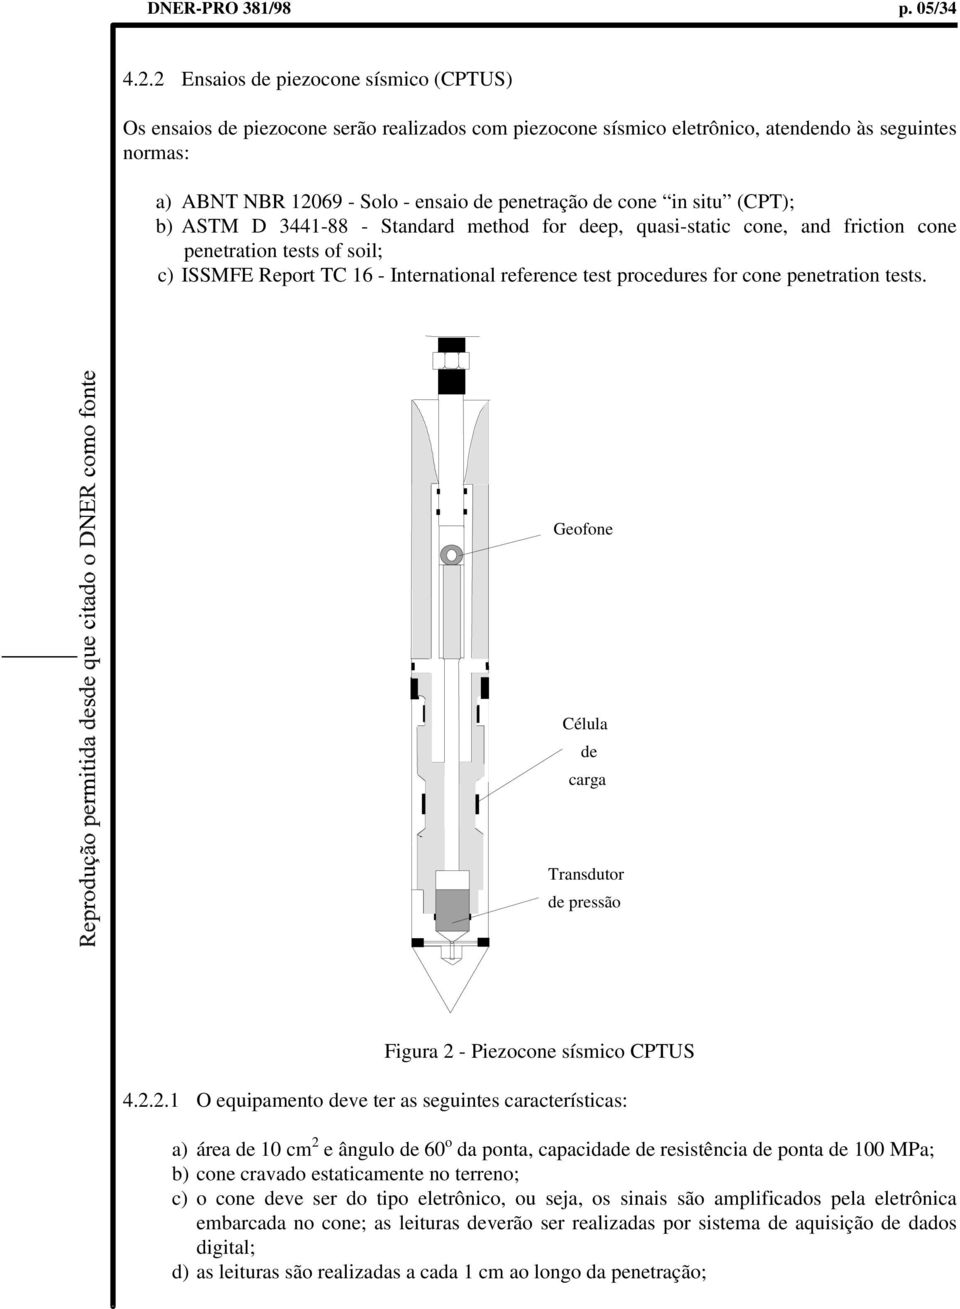 cone in situ (CPT); b) ASTM D 3441-88 - Standard method for deep, quasi-static cone, and friction cone penetration tests of soil; c) ISSMFE Report TC 16 - International reference test procedures for